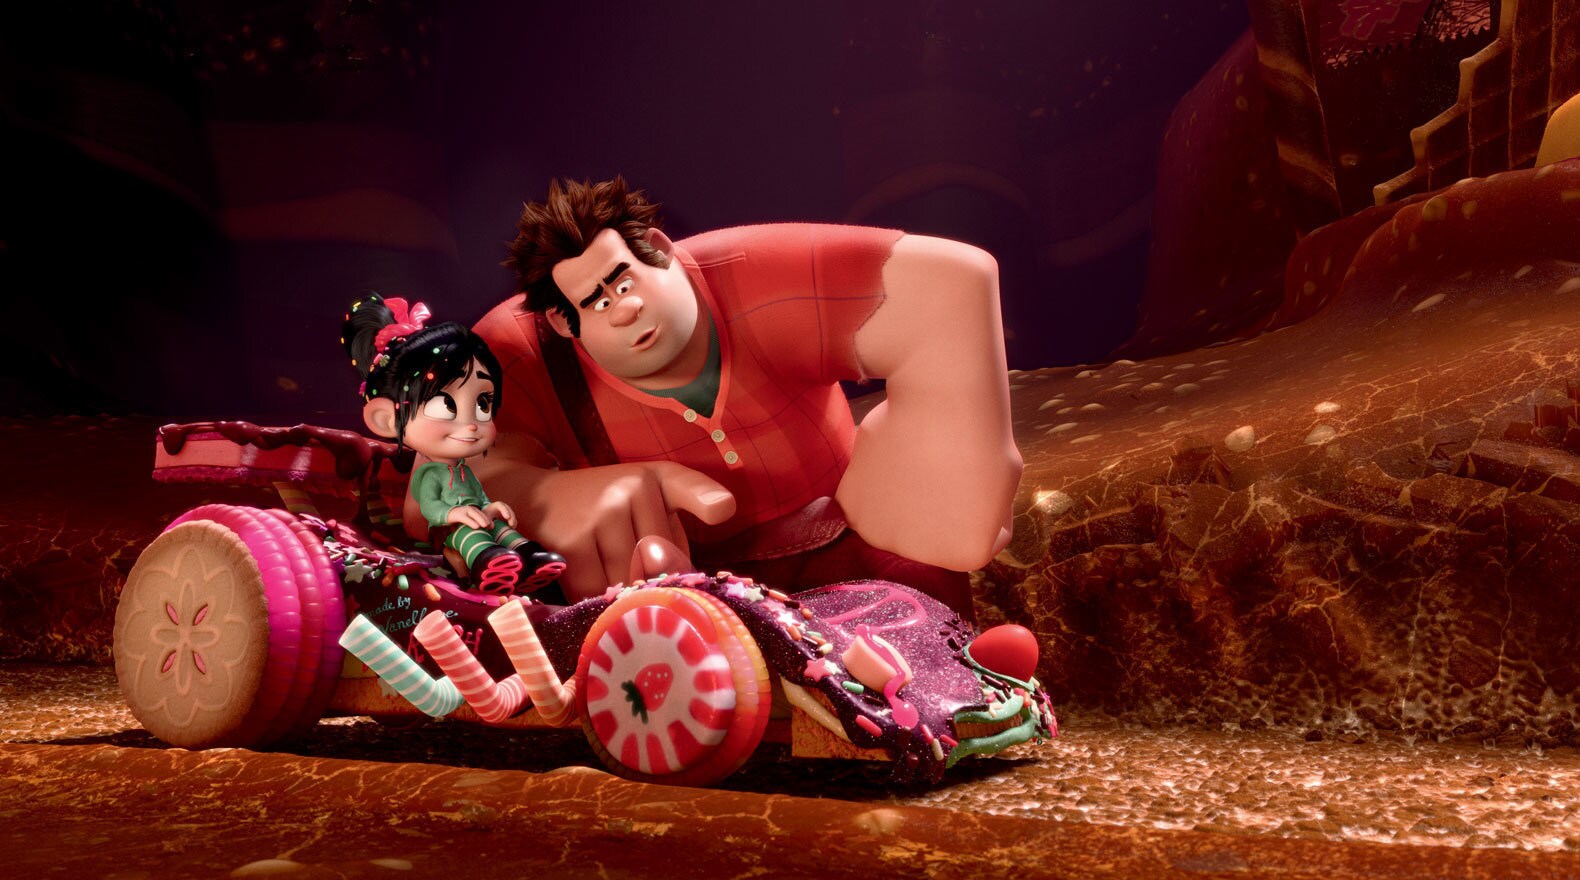 Ralph played by John C. Riley teaching Vanellope played by Sarah Silverman, who is in her candy car, how to drive in "Wreck-It Ralph"